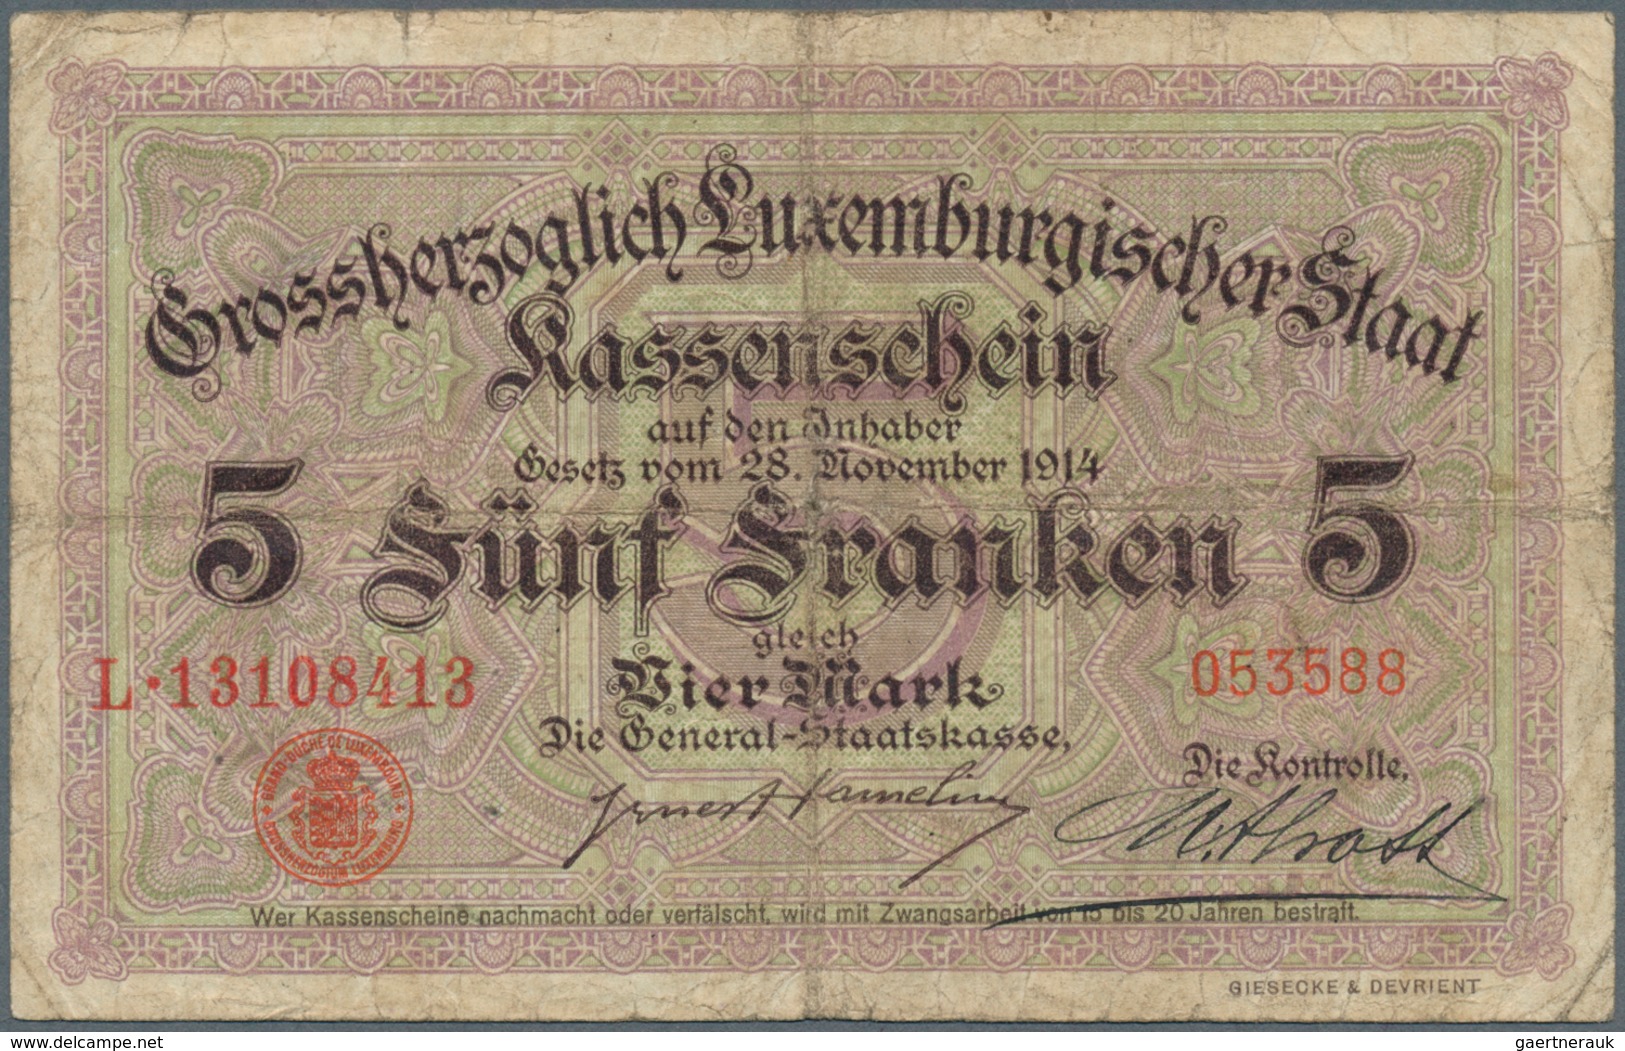 01937 Luxembourg: Very nice set with 5 Banknotes comprising 2 x 5 Francs = 4 Mark with Signature title: "L